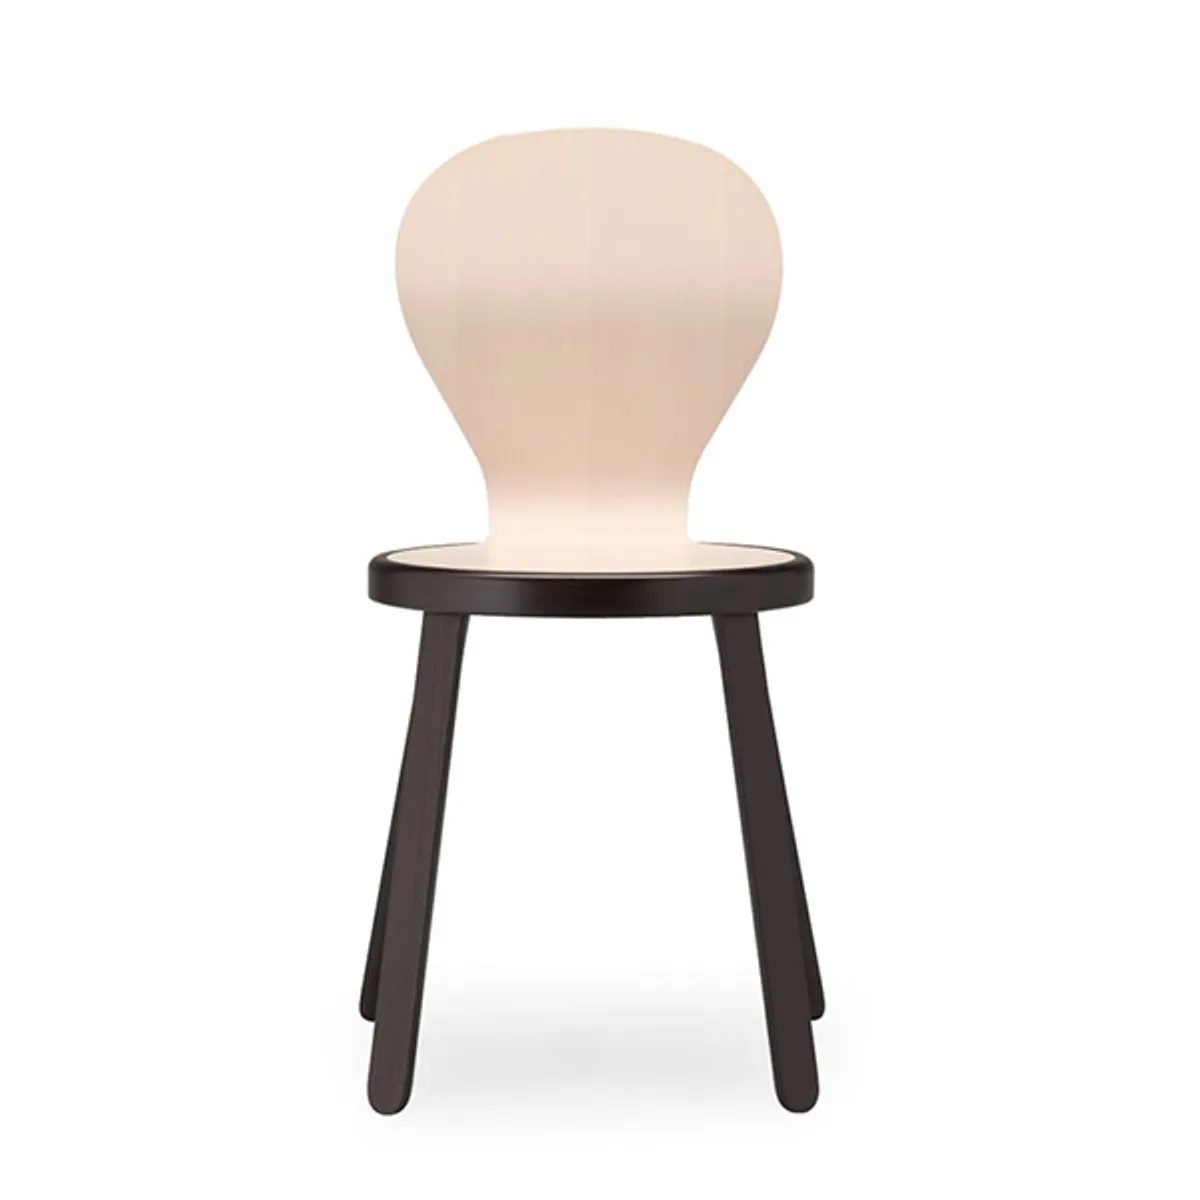 Lola Side Chair Natural Inside Out Contracts